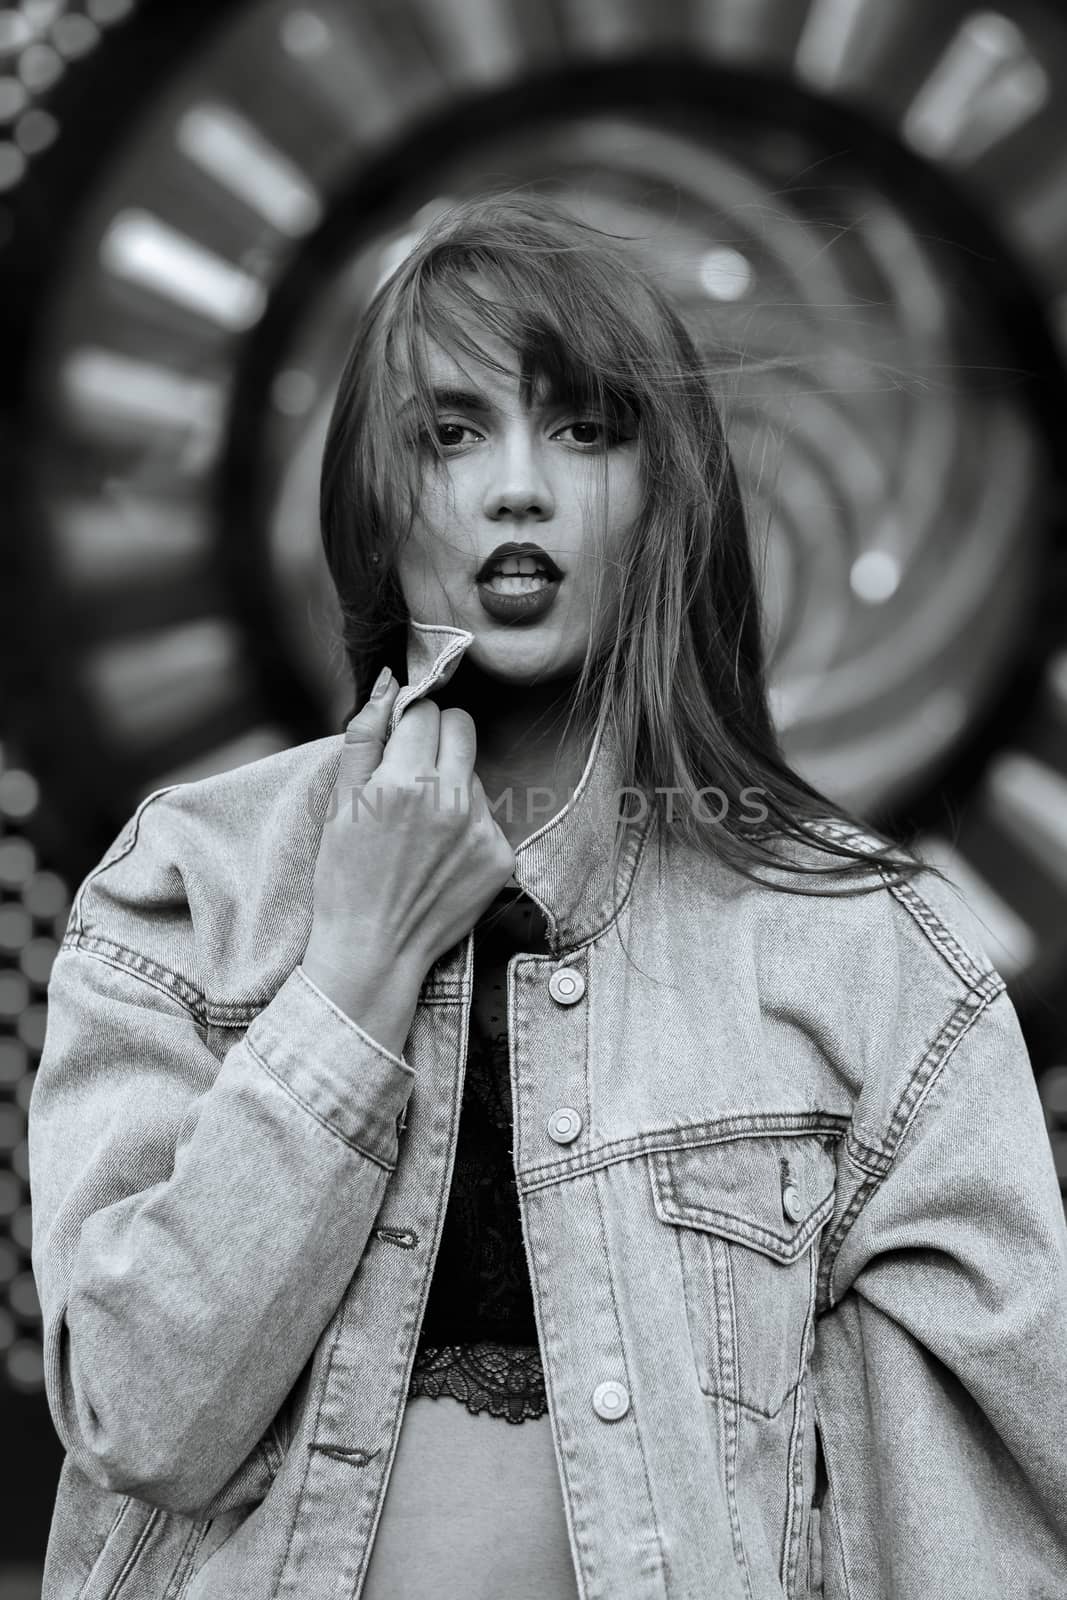 Lifestyle shot of seductive young woman with red lips wears jeans jacket. Monochrome color